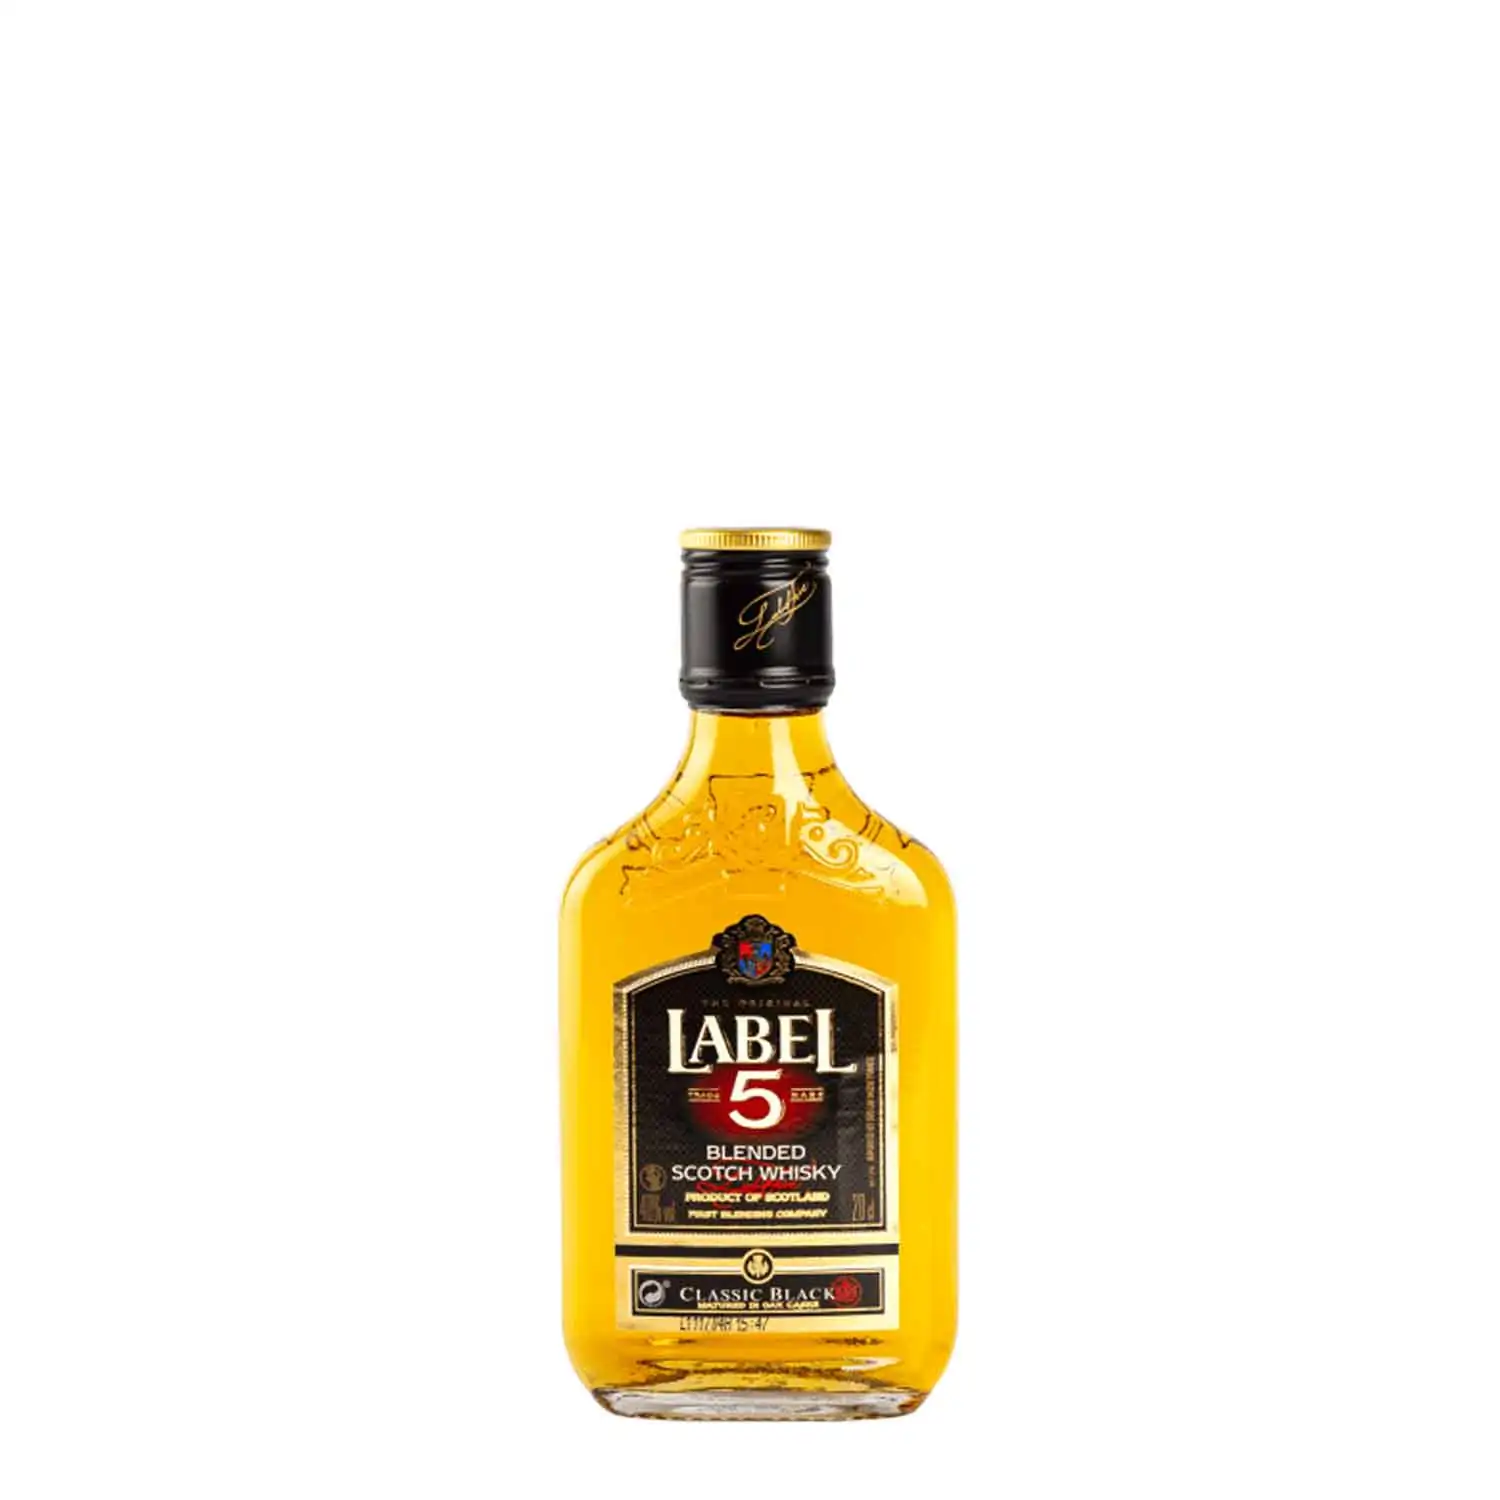 Label 5 classic black 20cl Alc 40% - Buy at Real Tobacco